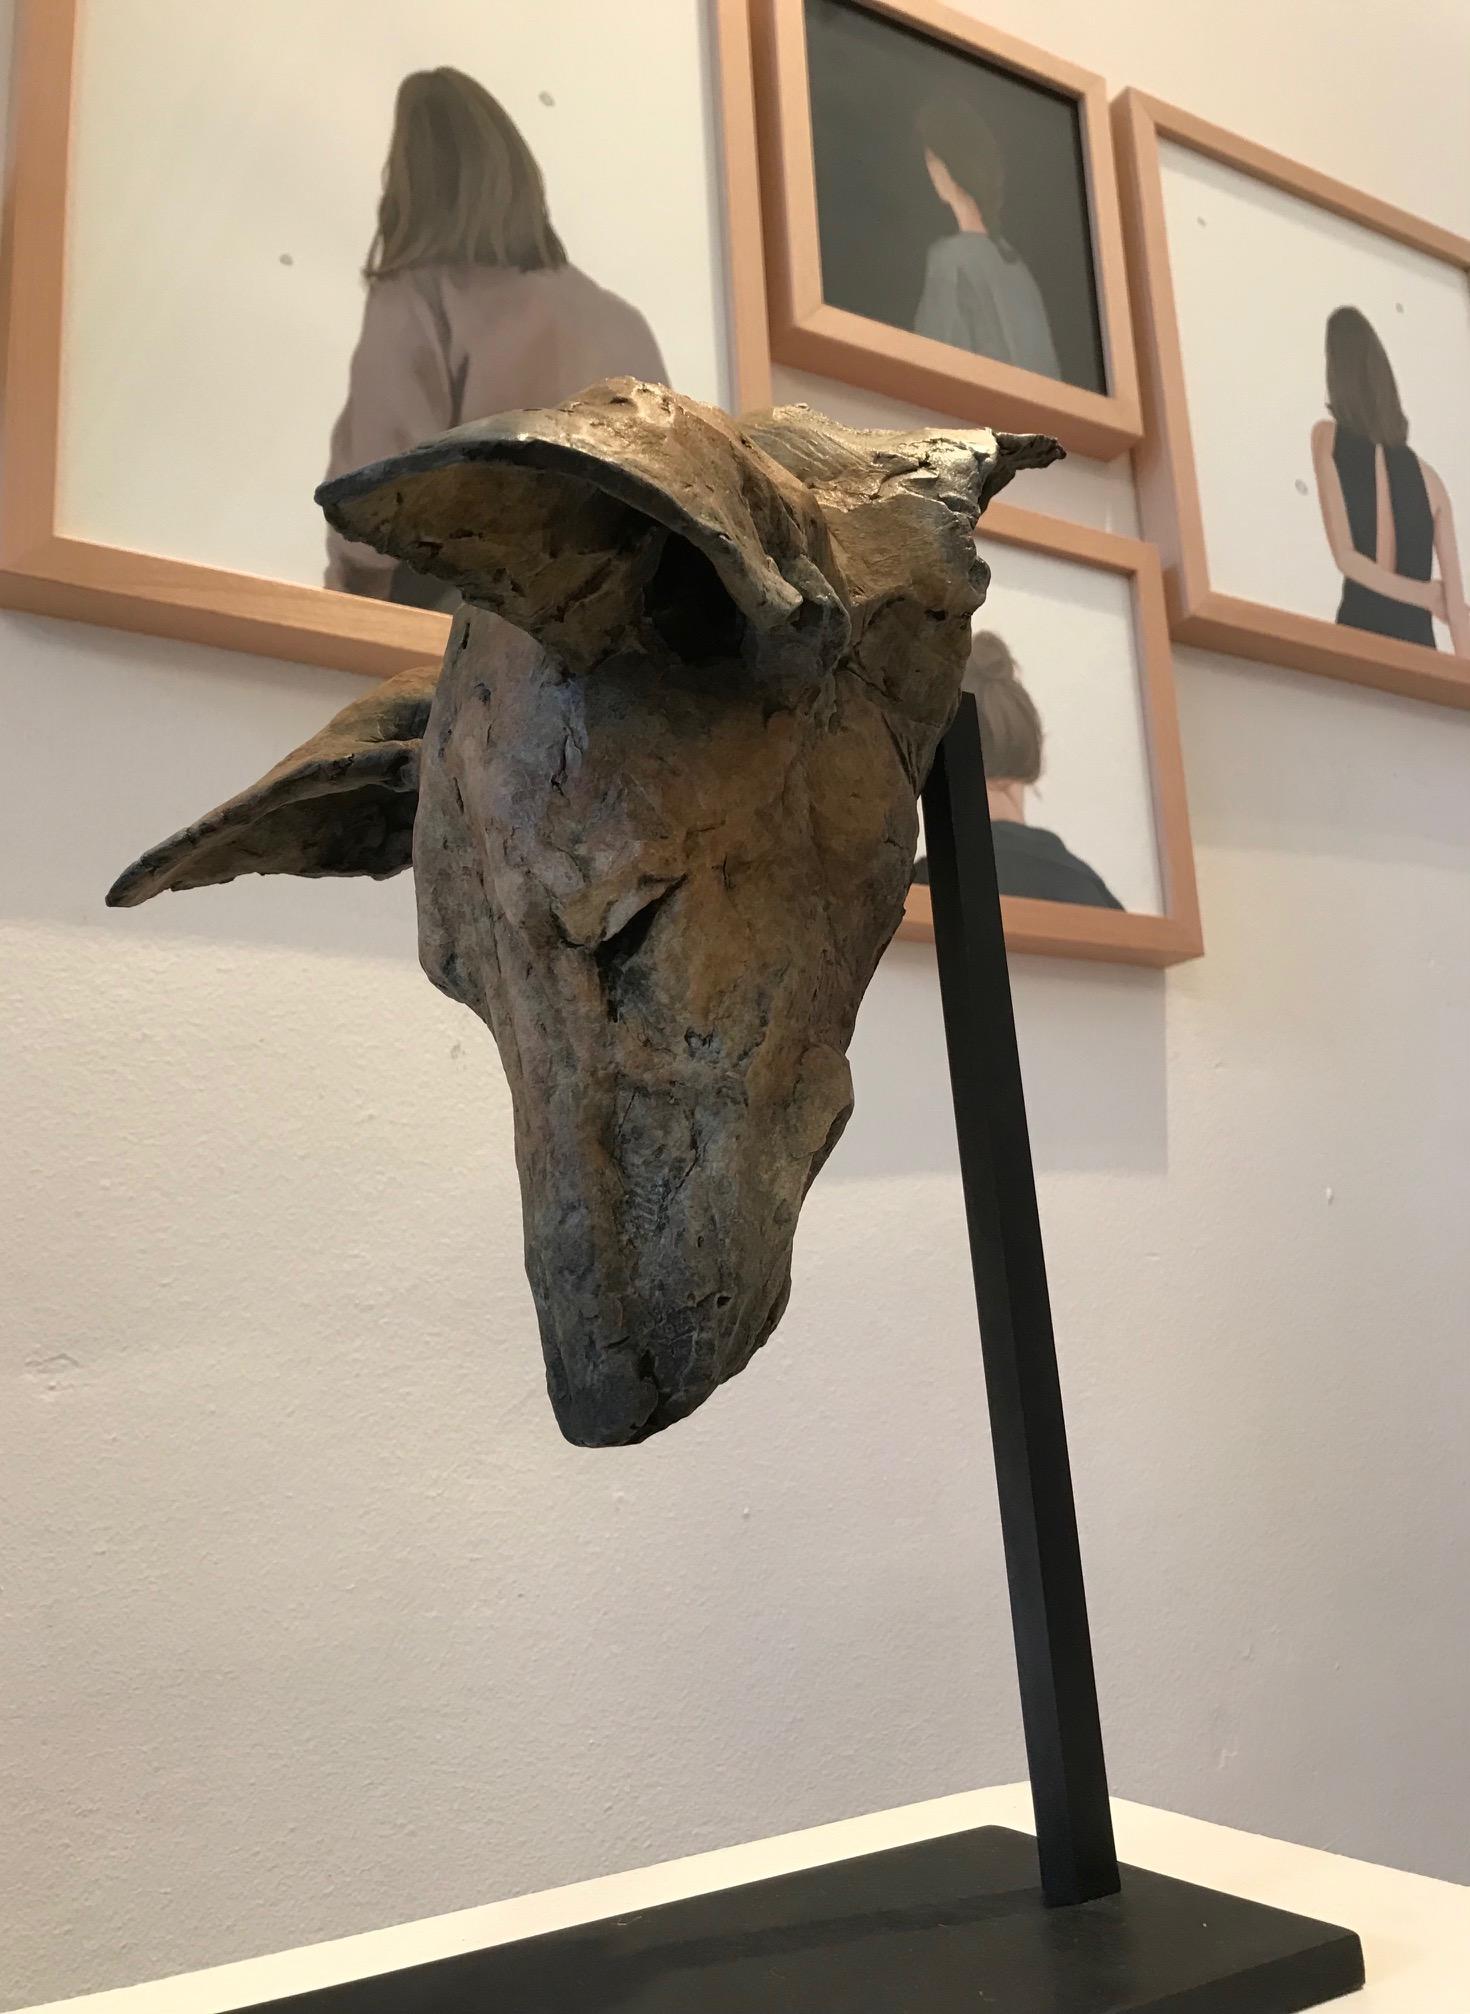 Nichola Theakston (1967) has established herself as one of the UK’s foremost contemporary sculptors working within the animal genre. 

With the ''Tesem Study'' Nichola shows how exquisite she can capture the feelings and expressions in an animal.